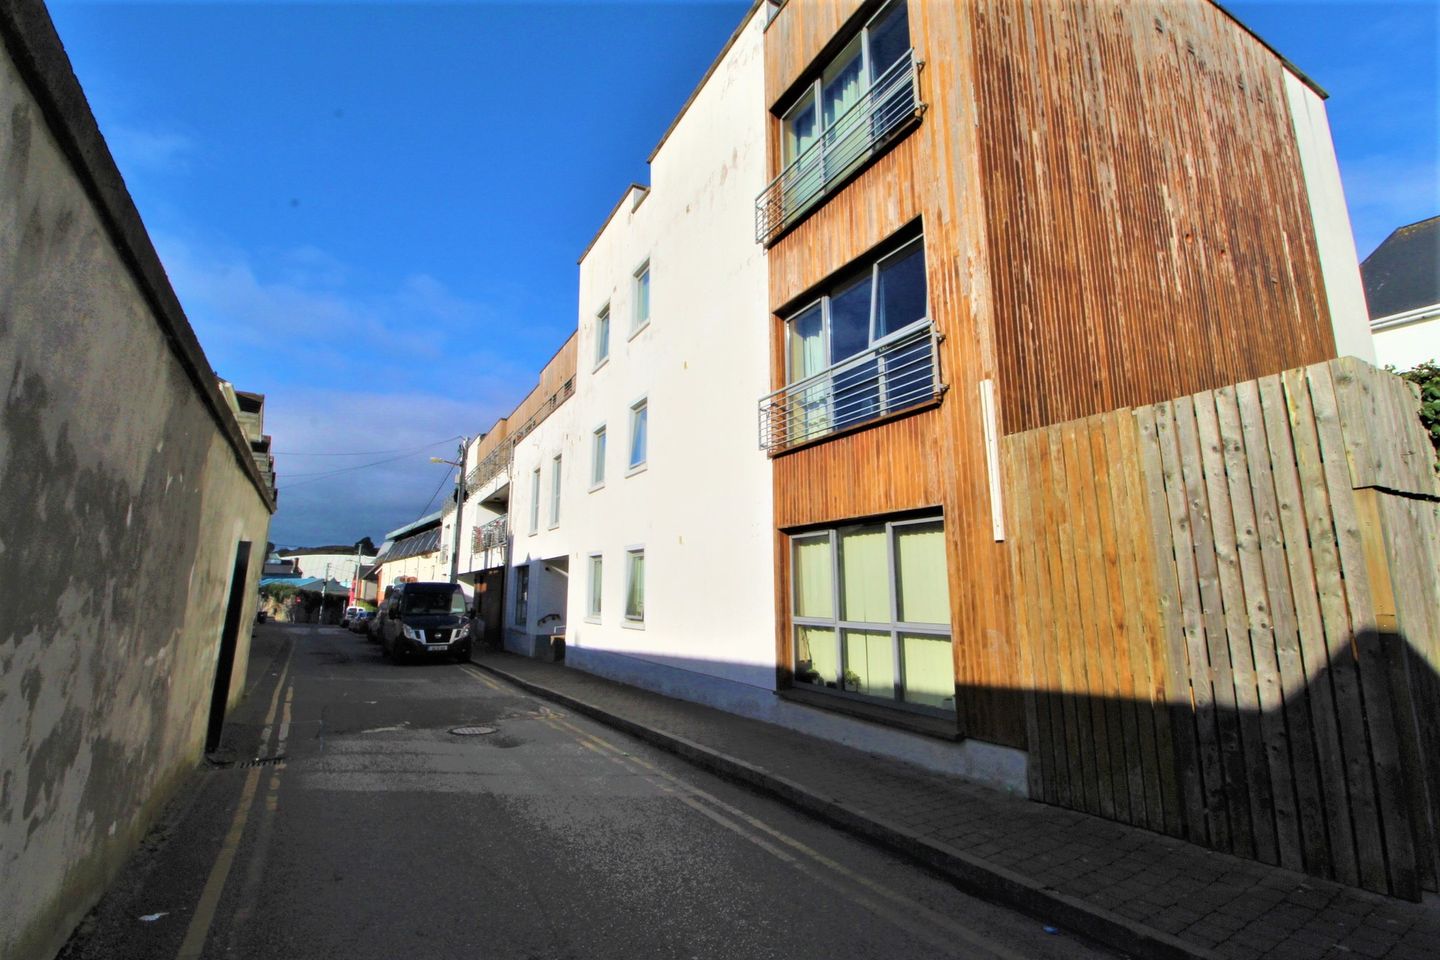 3 Block A The Court Yard, Summerhill, Waterford City, Co. Waterford, X91N153